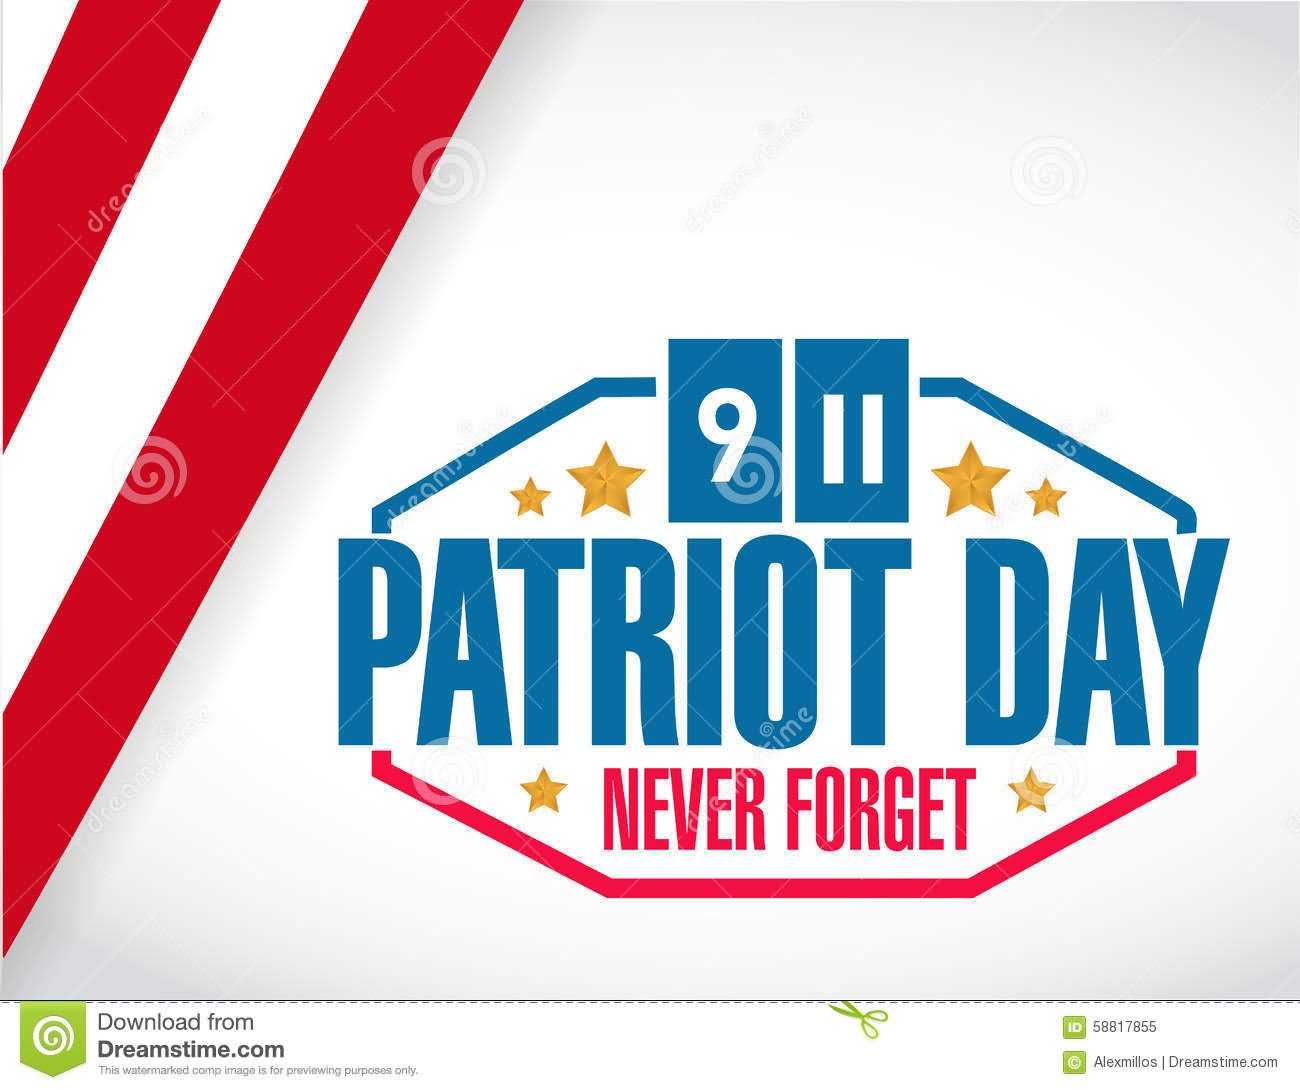 9-11 Patriot Day Never Forget Picture